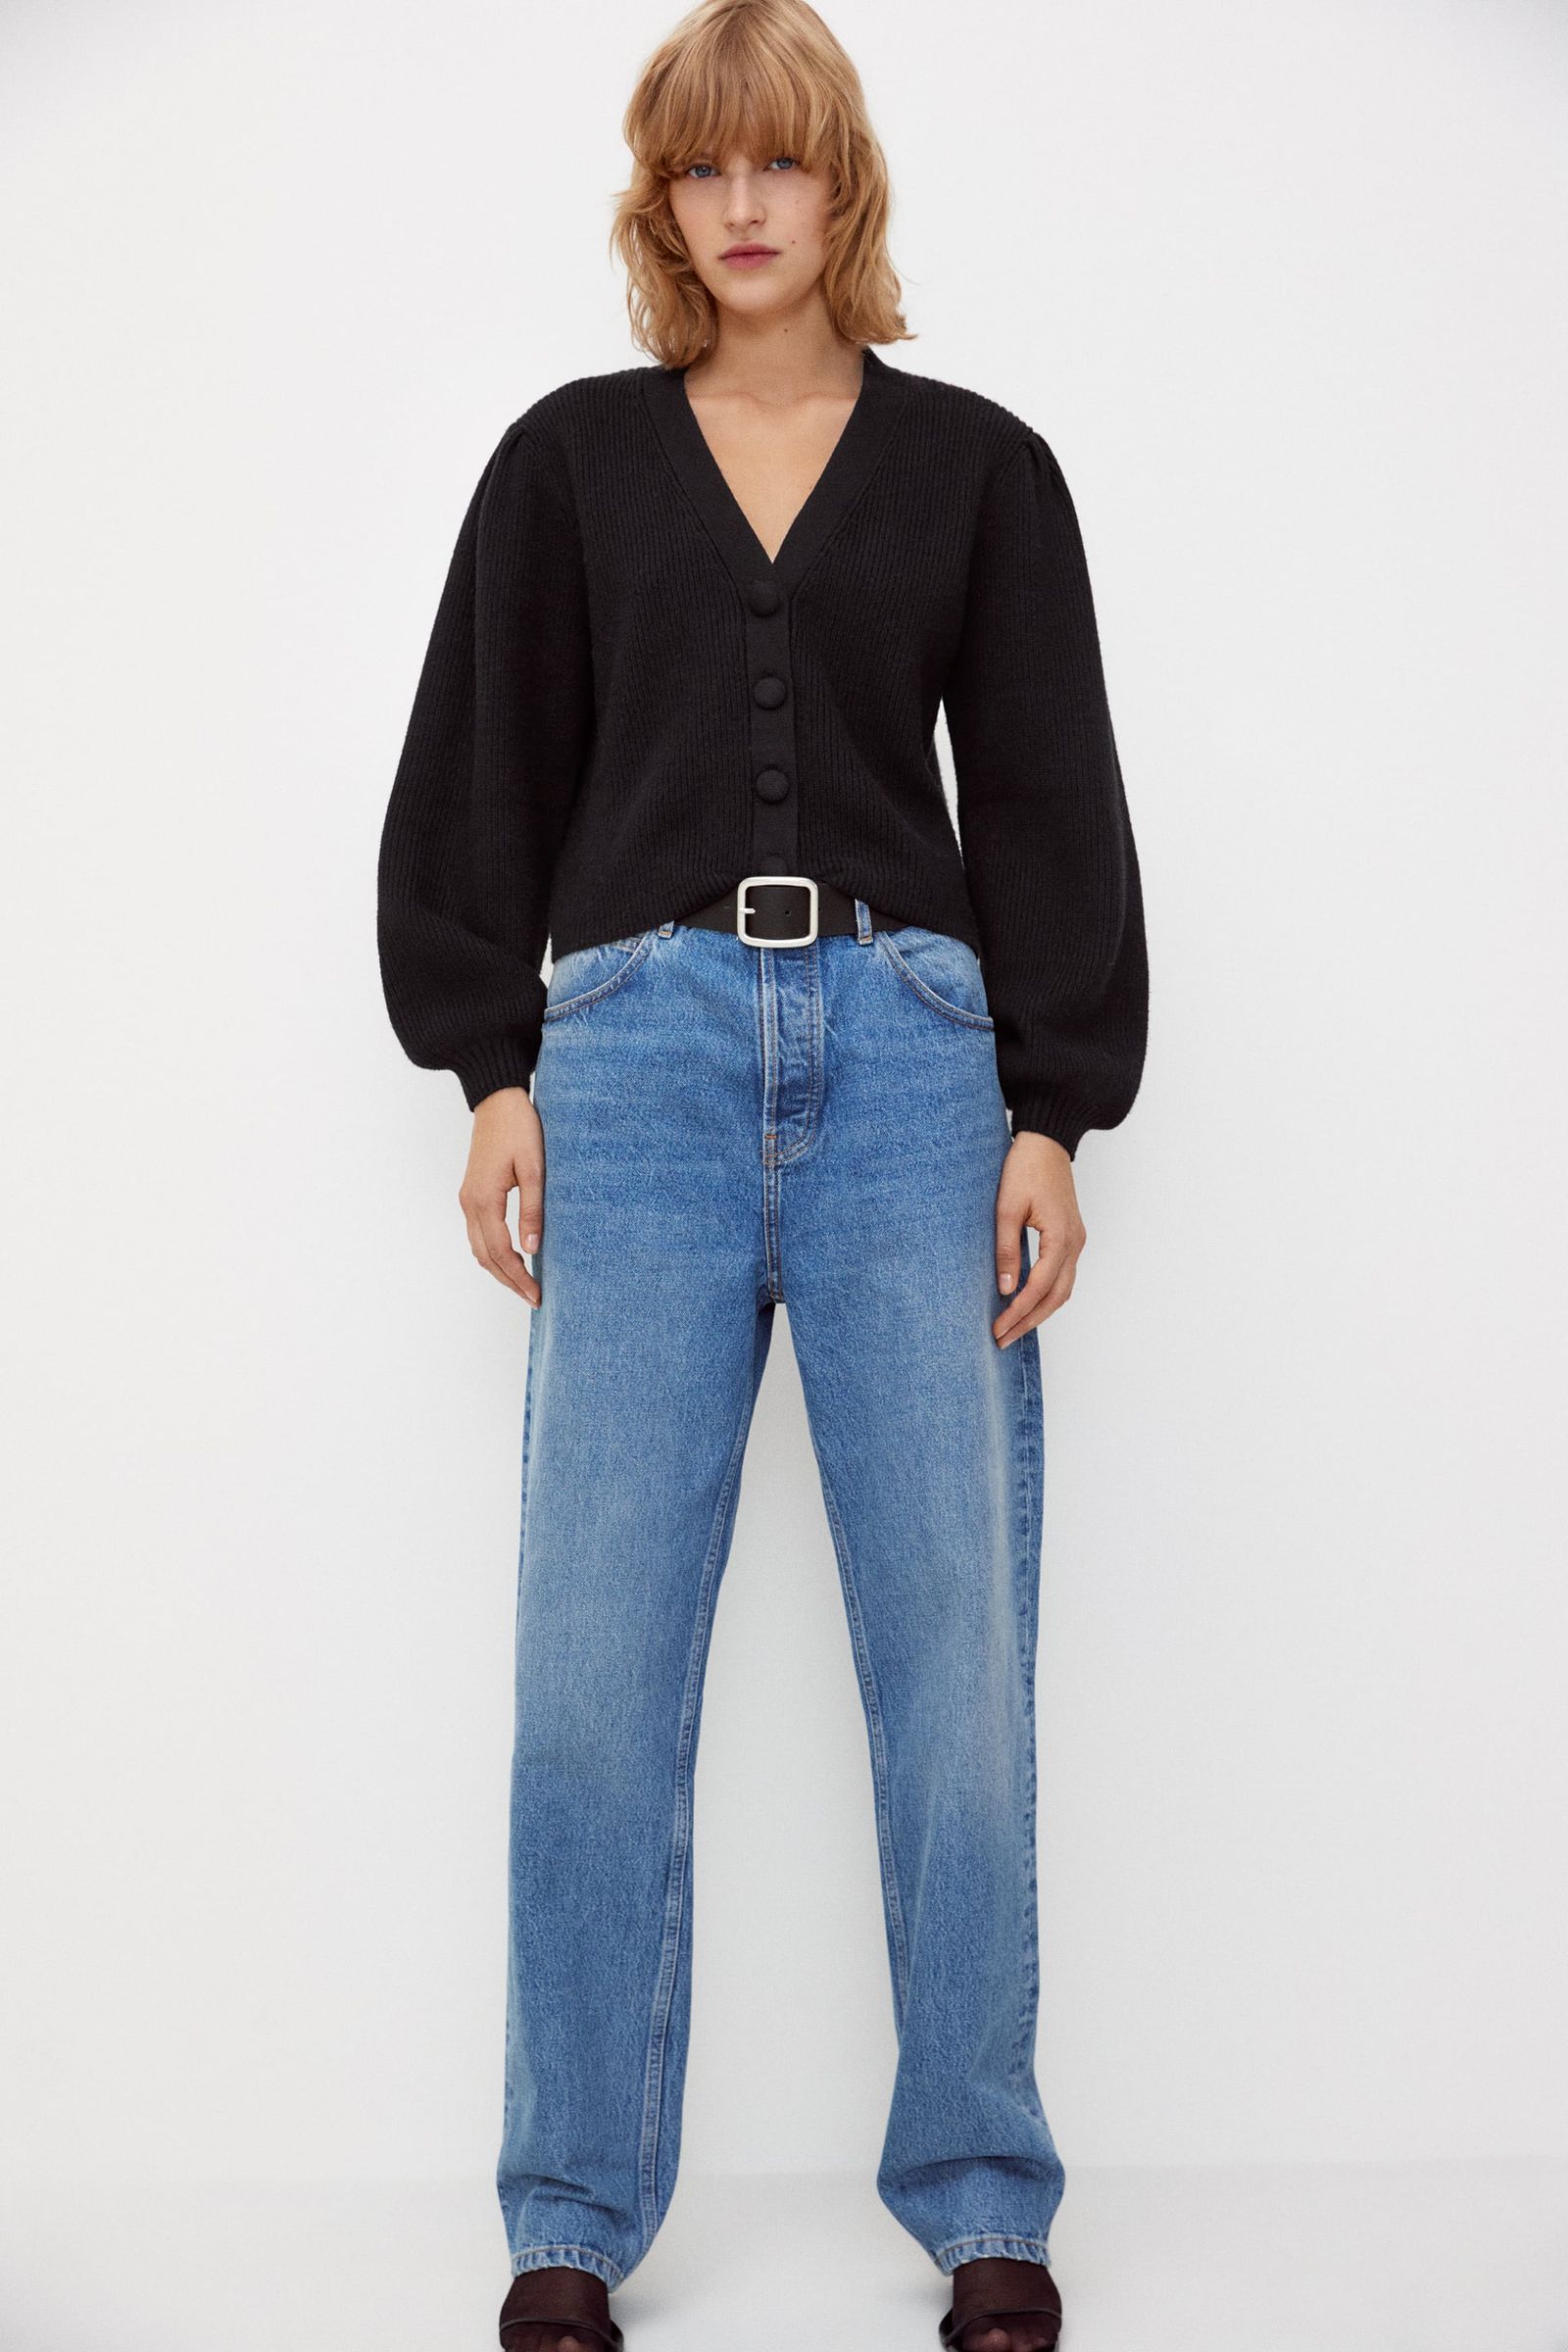 31 of the Best Cheap Zara Items to Buy Right Now | Who What Wear